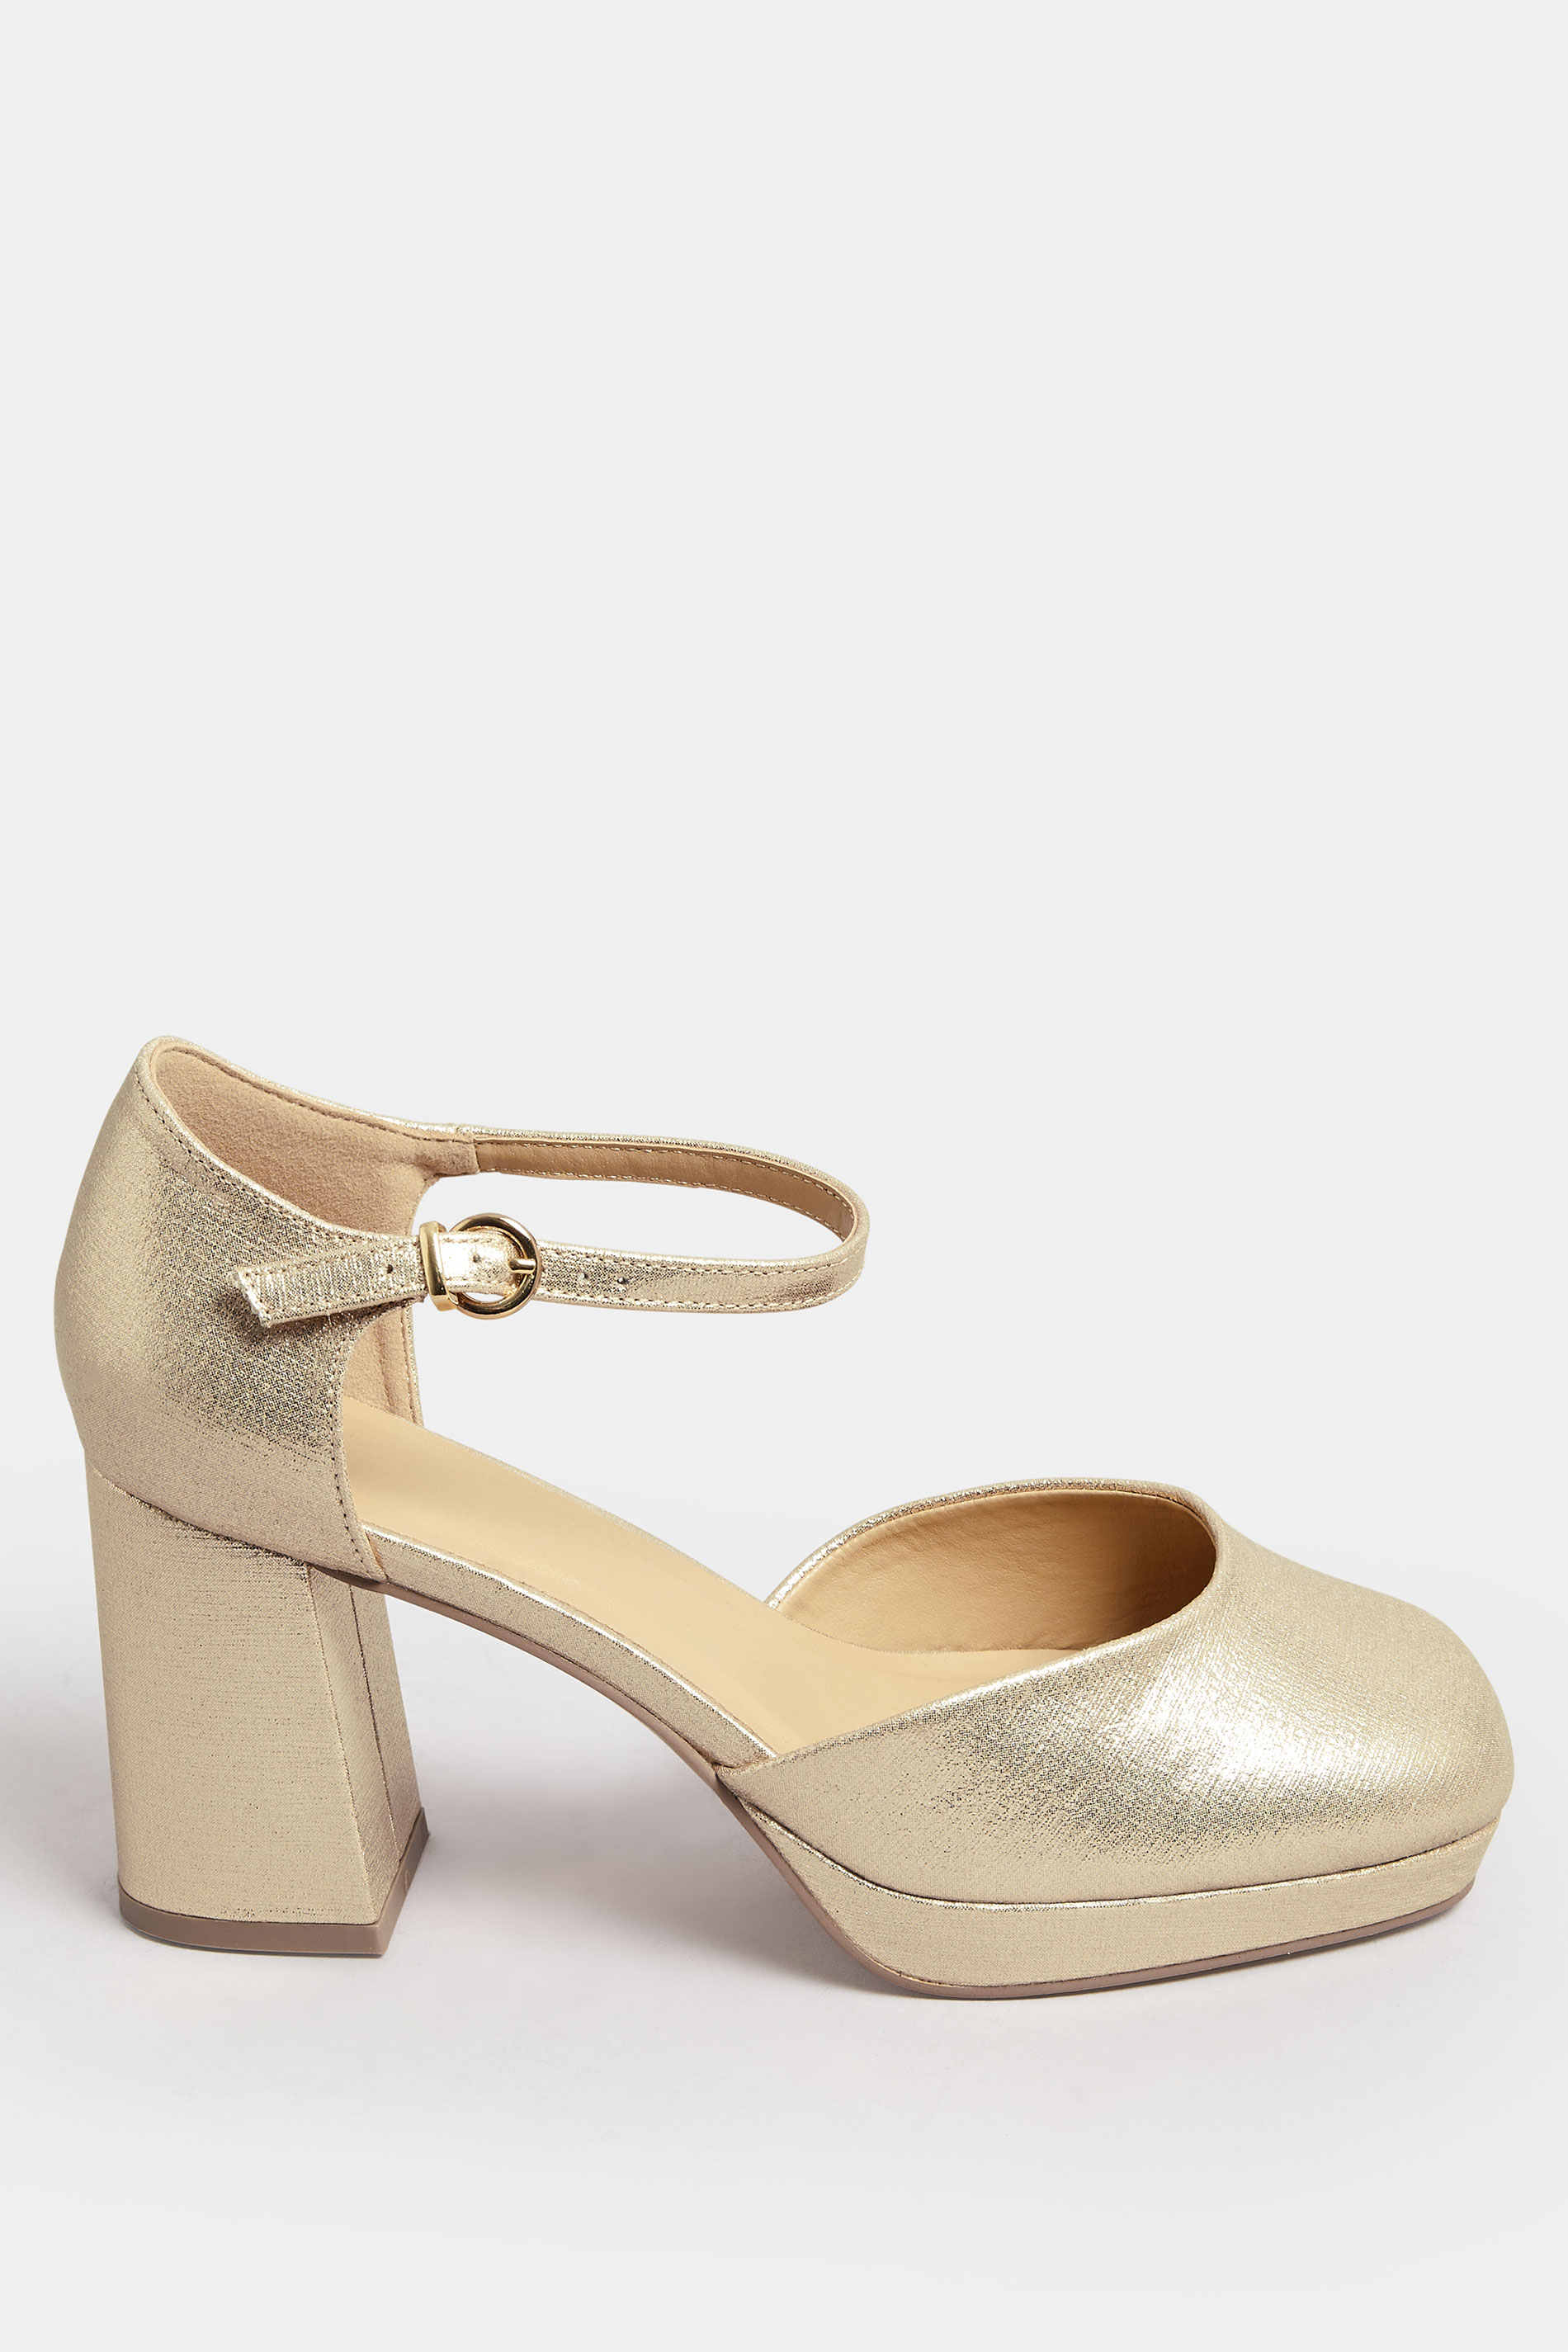 Gold Platform Block Heel Court Shoes In Extra Wide EEE Fit | Yours Clothing 3